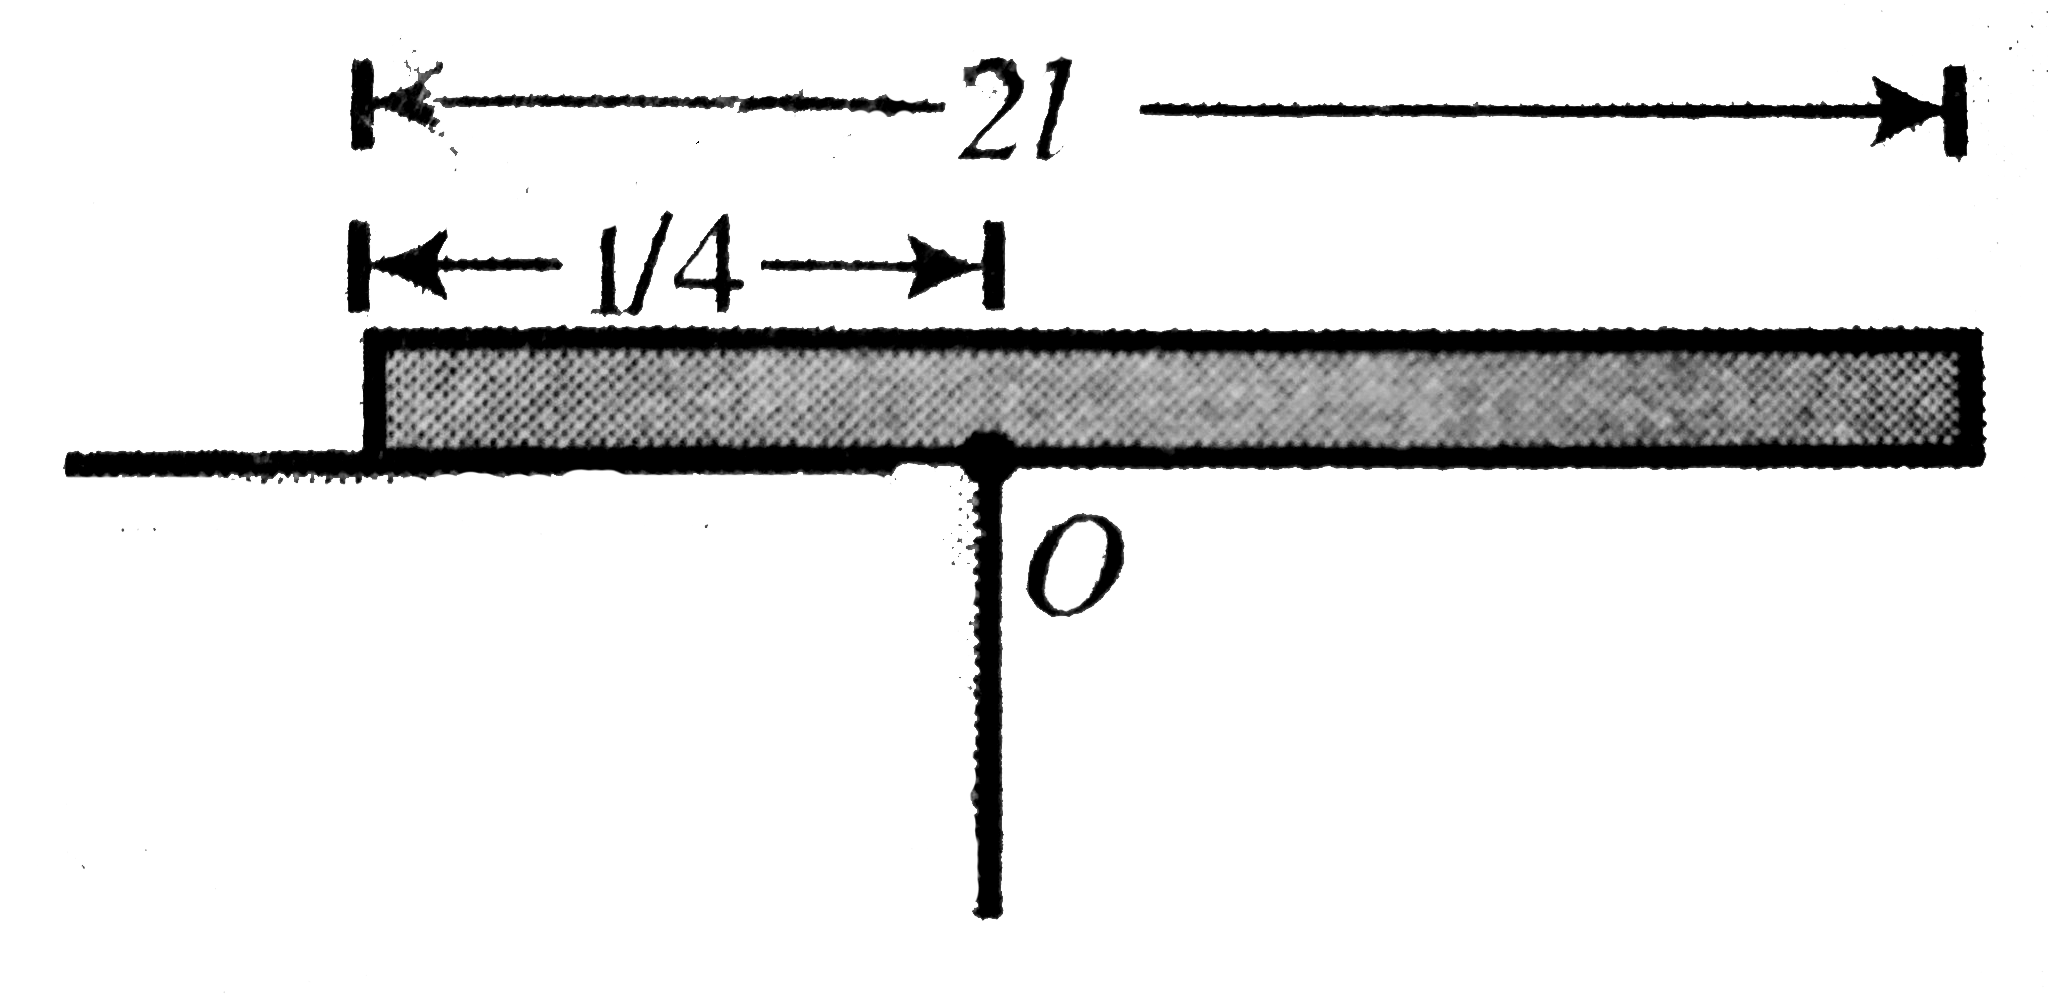 One fourth length of a uniform rod of length 2l and mass m is place don a horizontal table and the rod is held horizontal. The rod is released from rest. Find the normal reaction on the rod as soon as the rod is released.